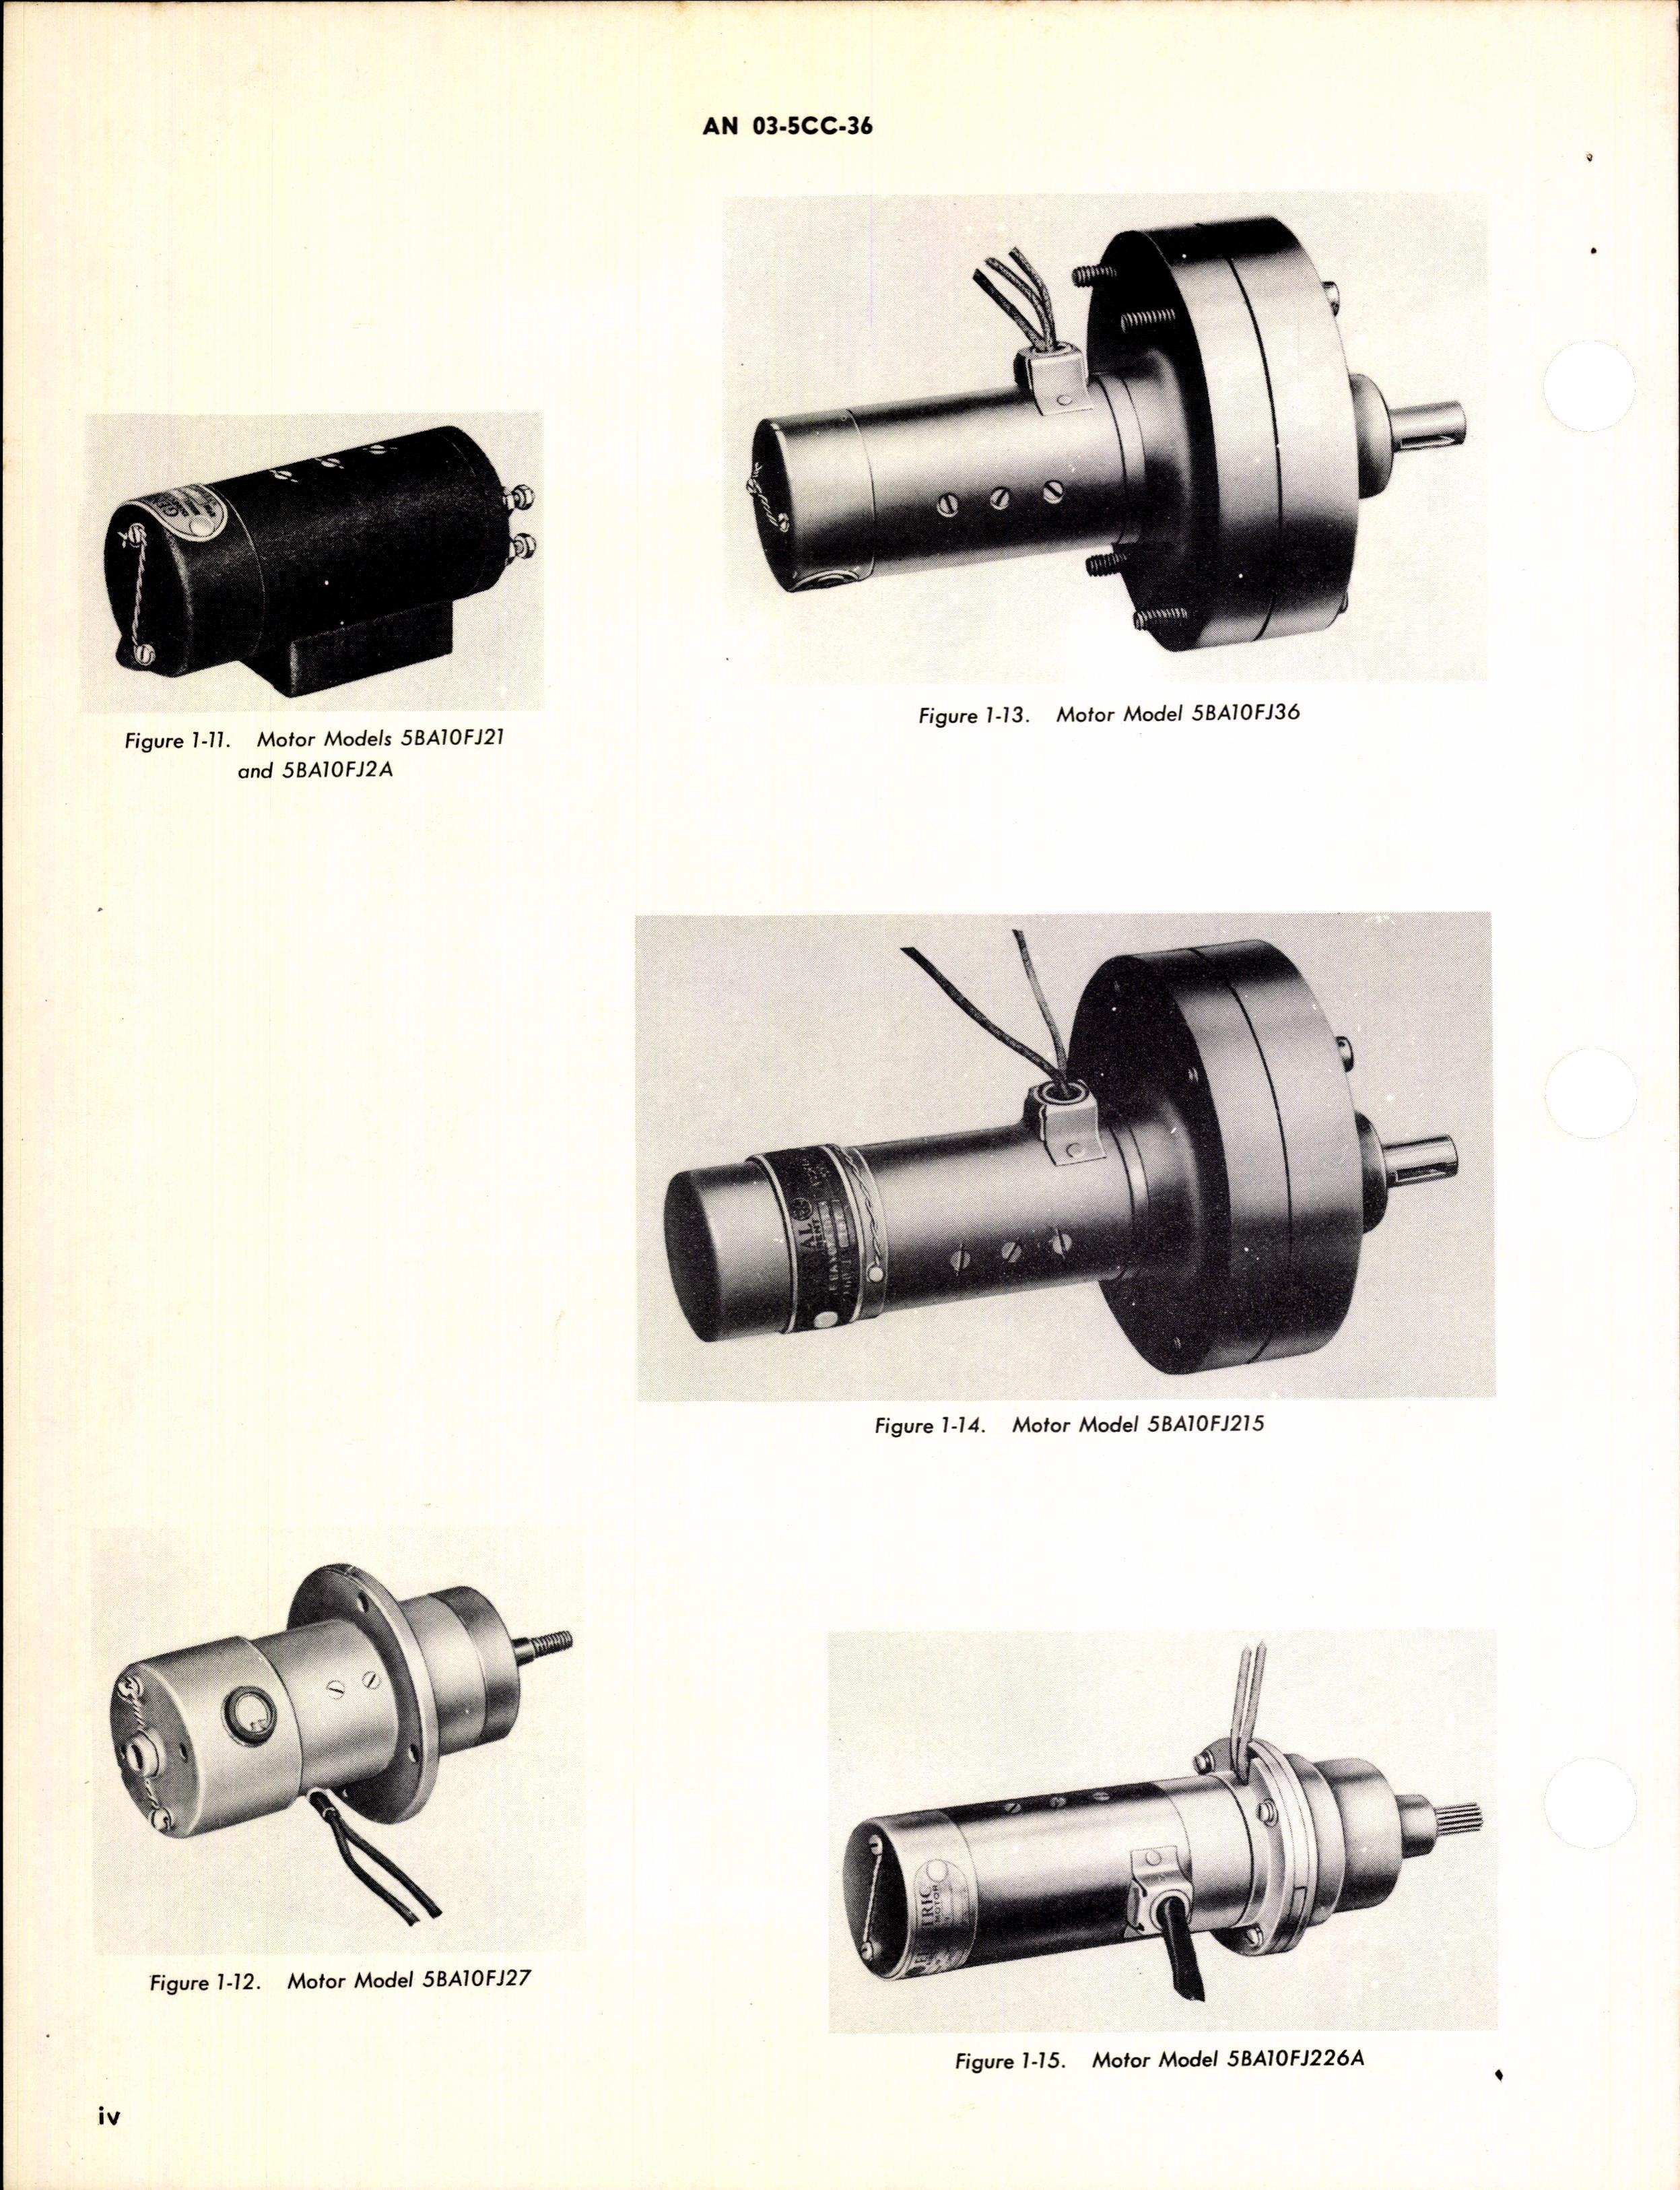 Sample page 6 from AirCorps Library document: Overhaul Instructions for Aircraft Motors Series 5BA10